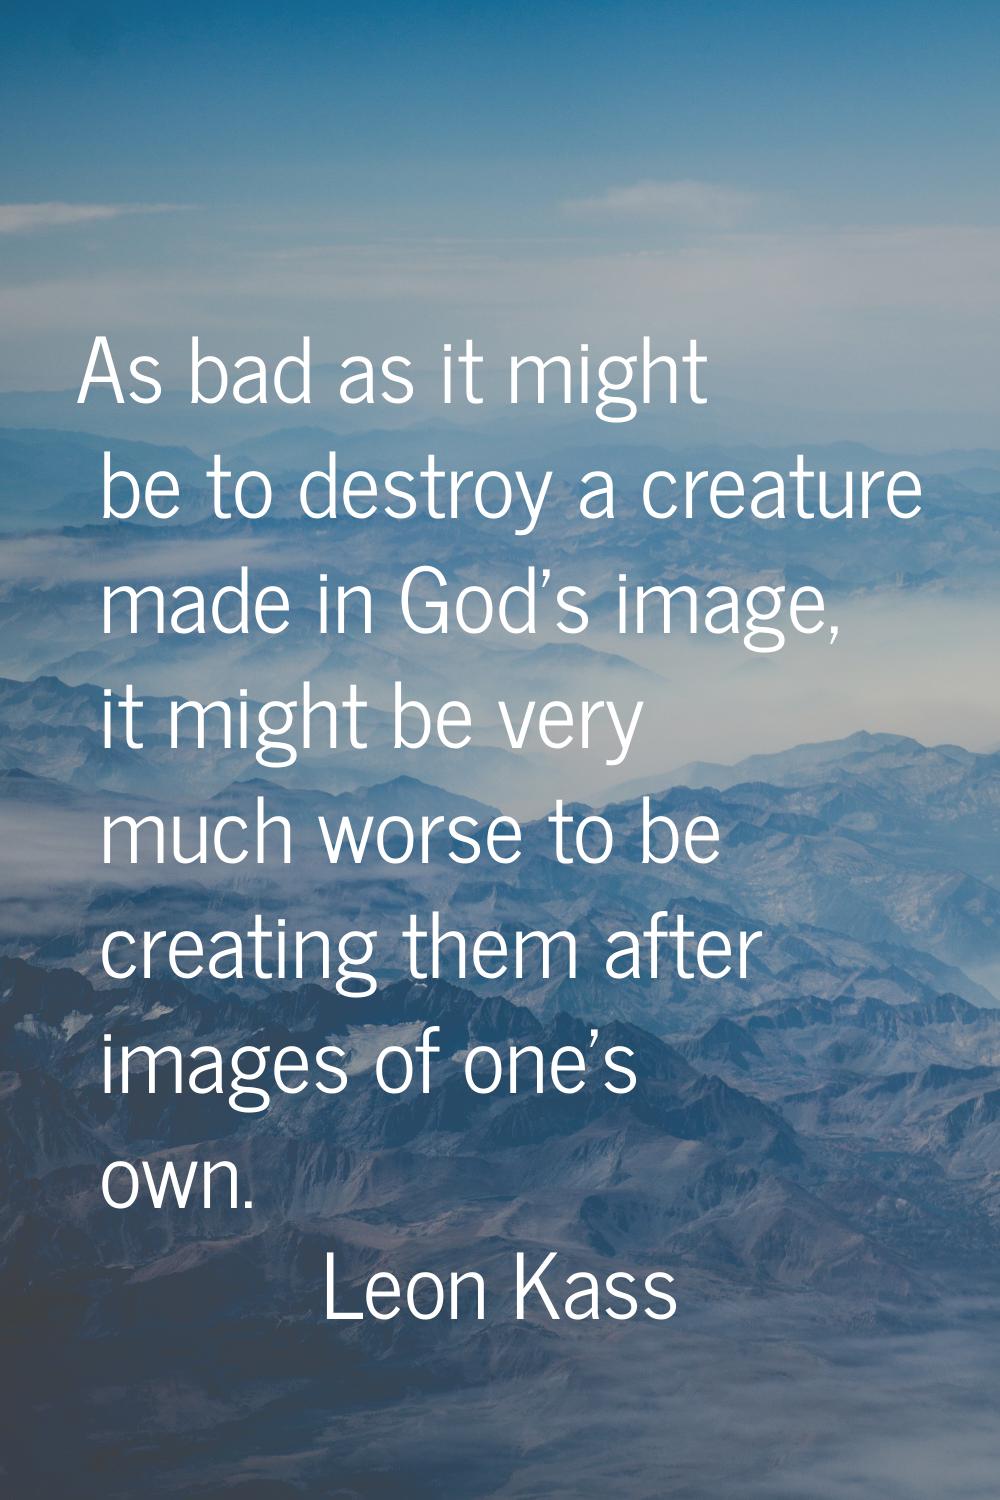 As bad as it might be to destroy a creature made in God's image, it might be very much worse to be 